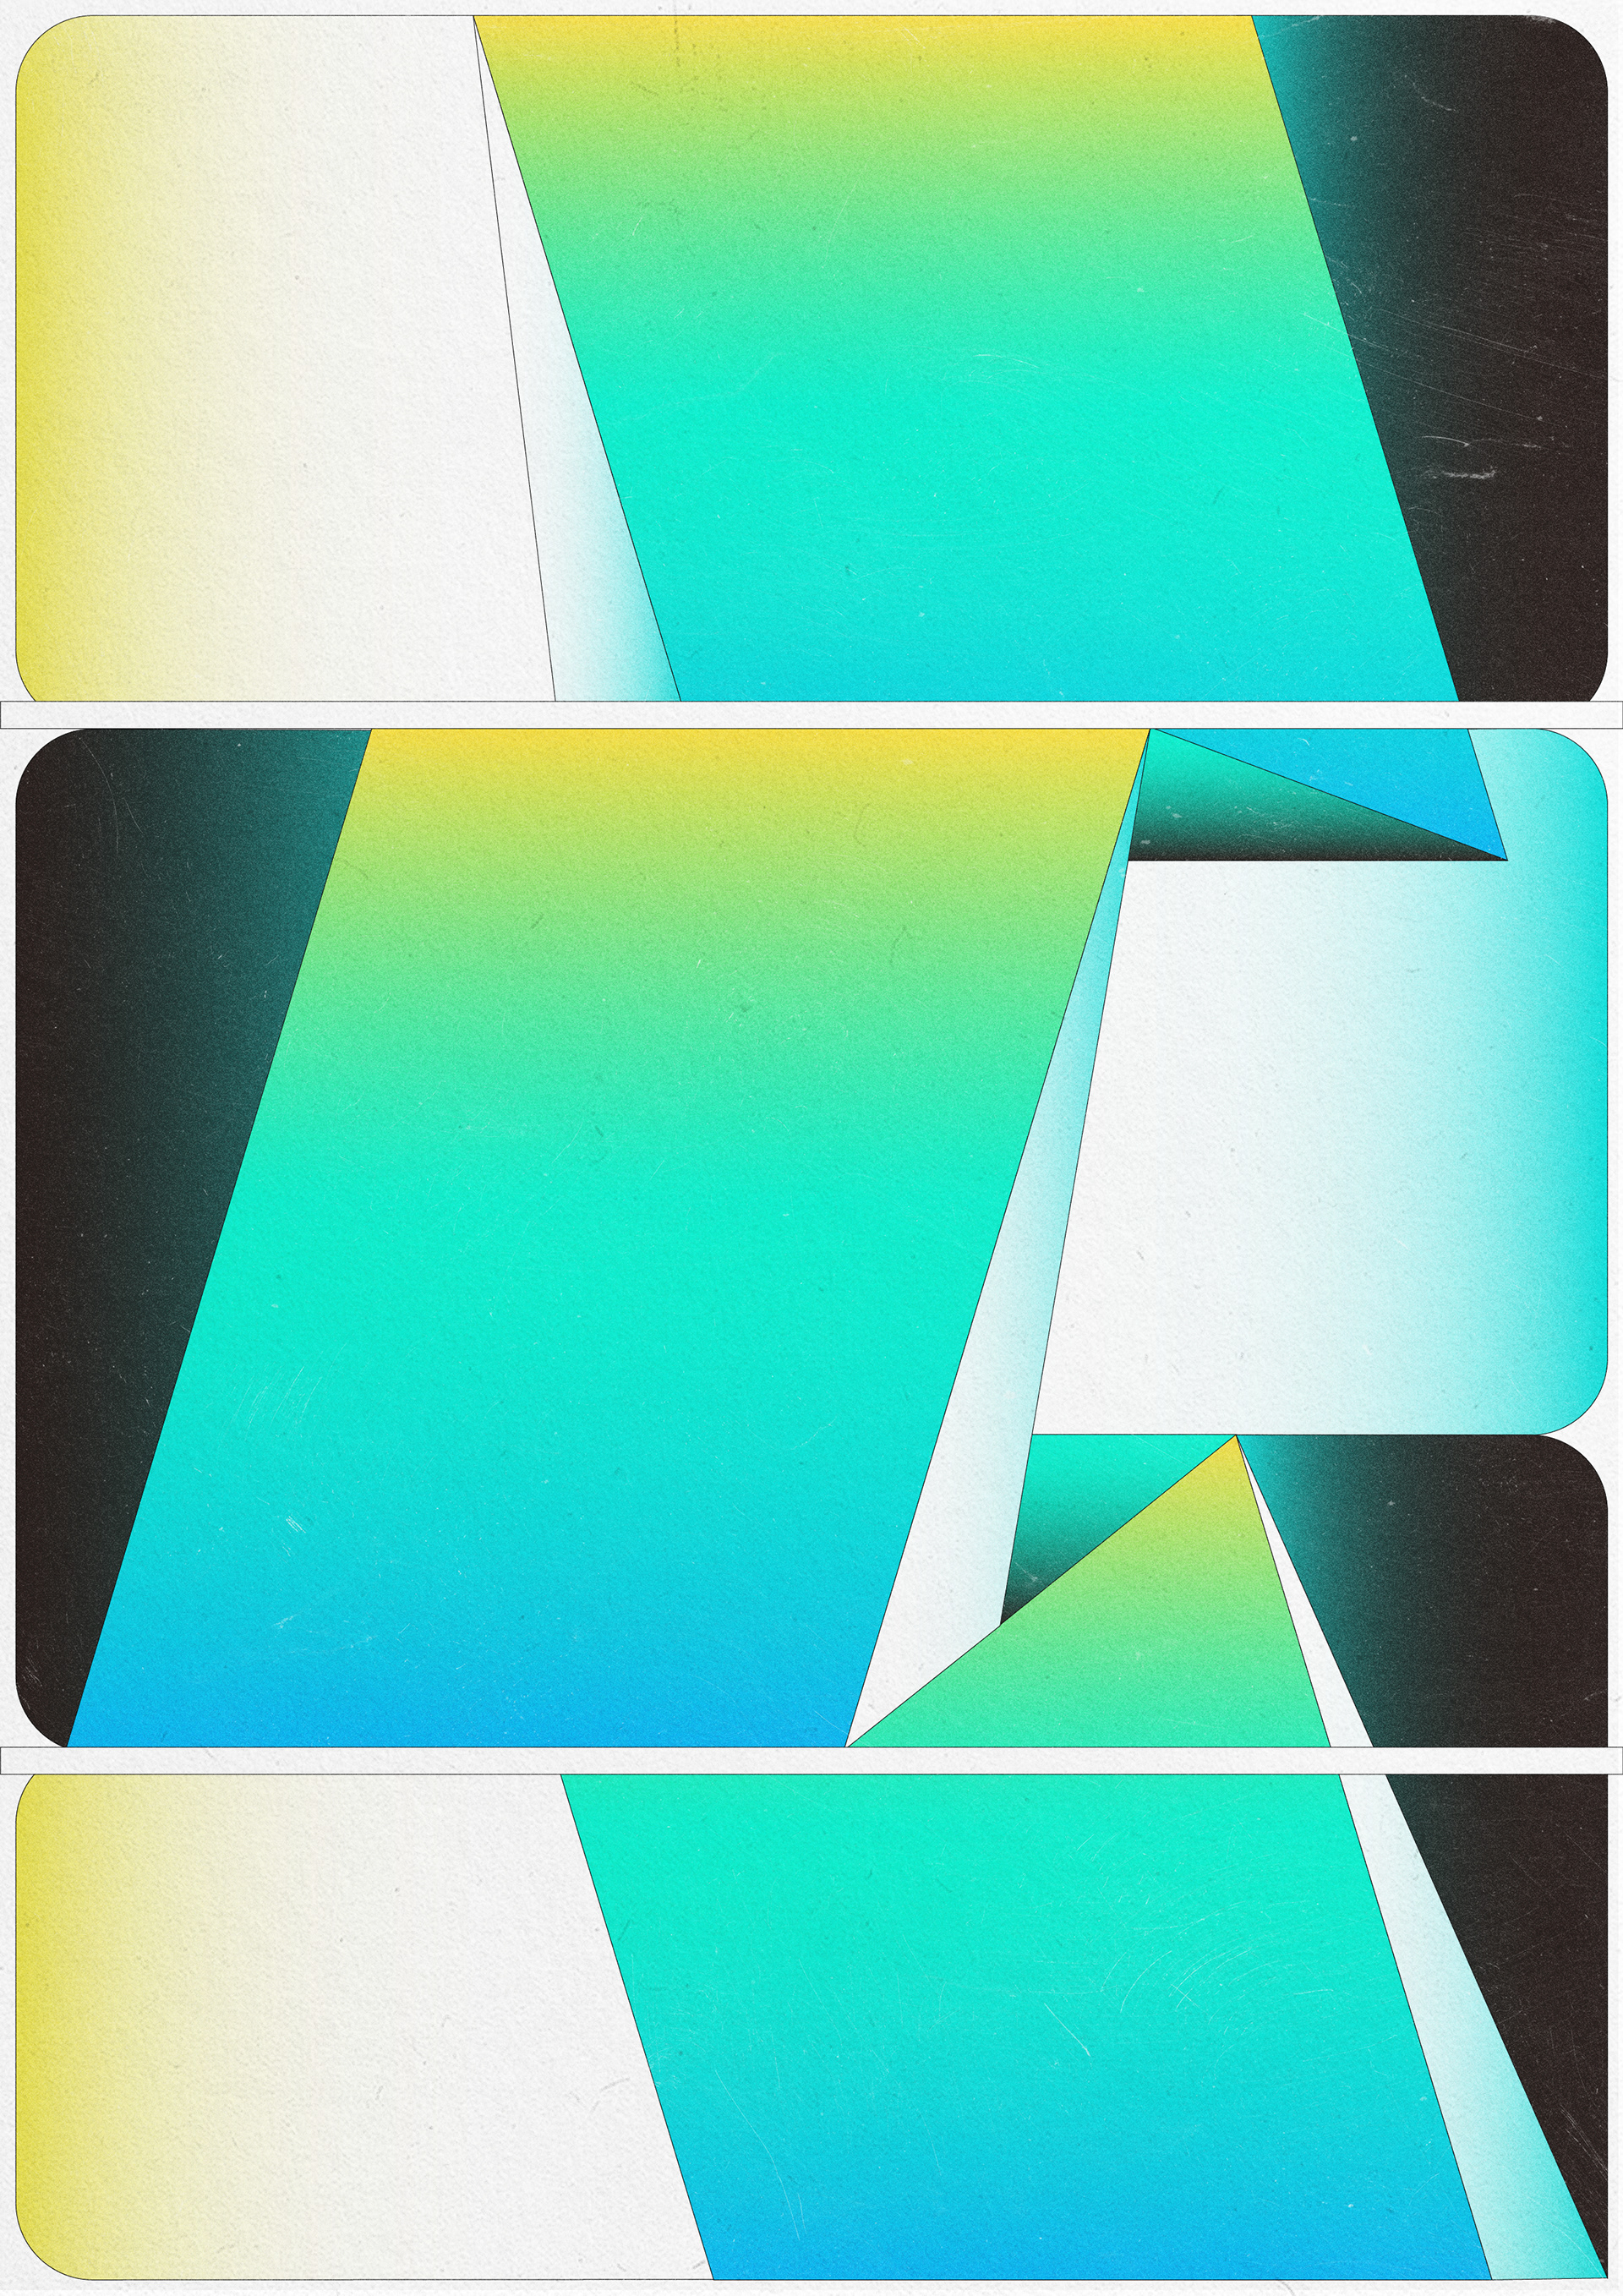 General 1920x2716 zimm wang colorful abstract lines gradient digital art turquoise